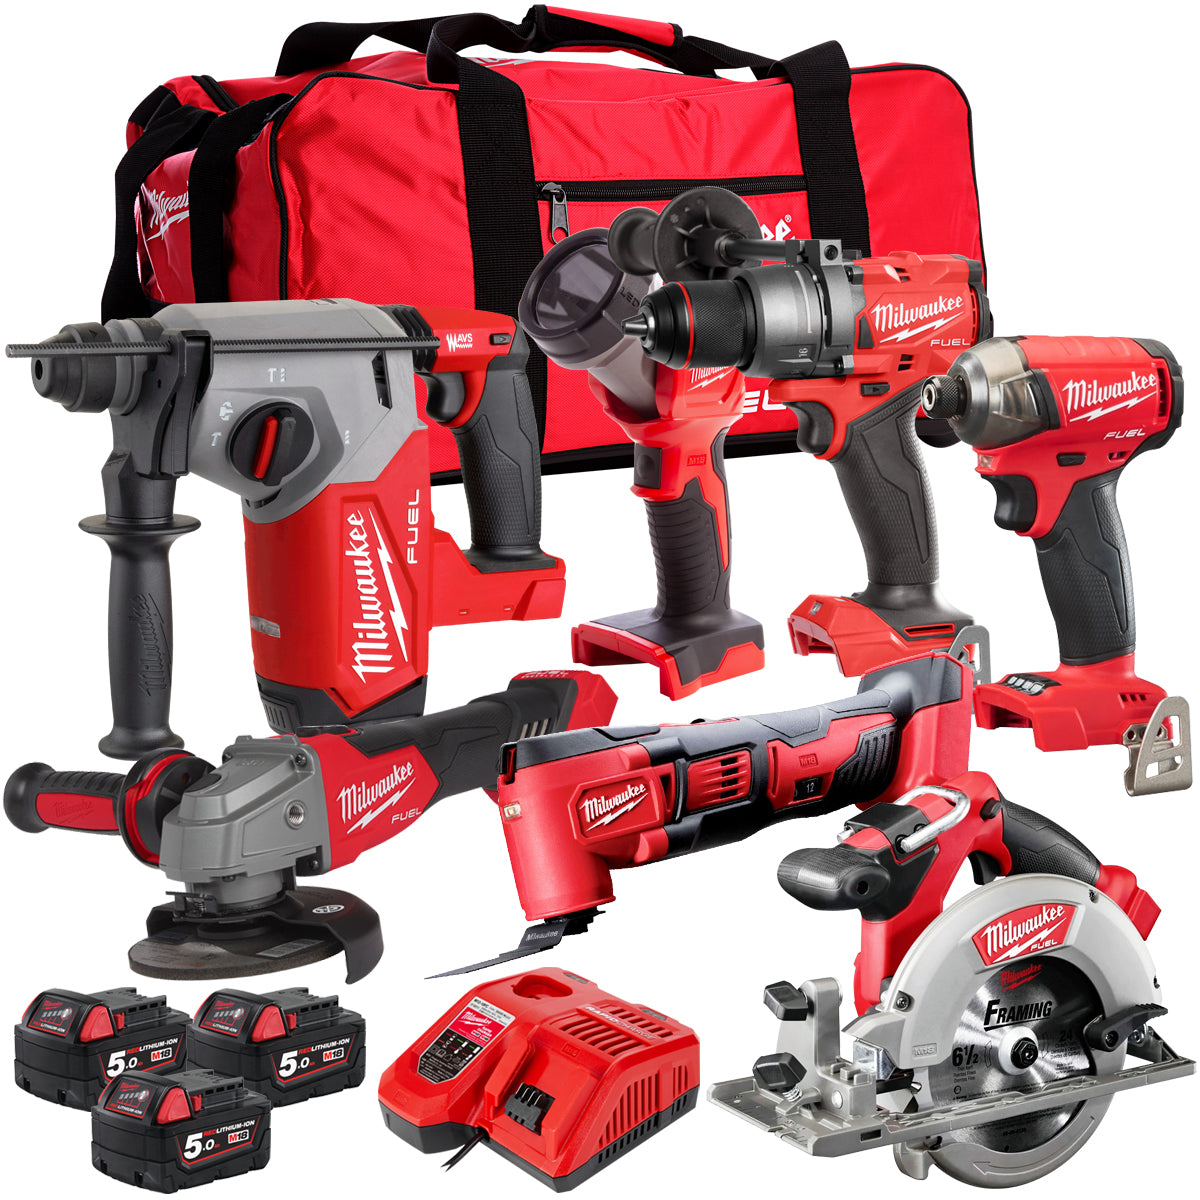 Milwaukee M18 FPP7T3-503B 18V 7 Piece Tool Kit with 3 x 5.0Ah Battery & Charger